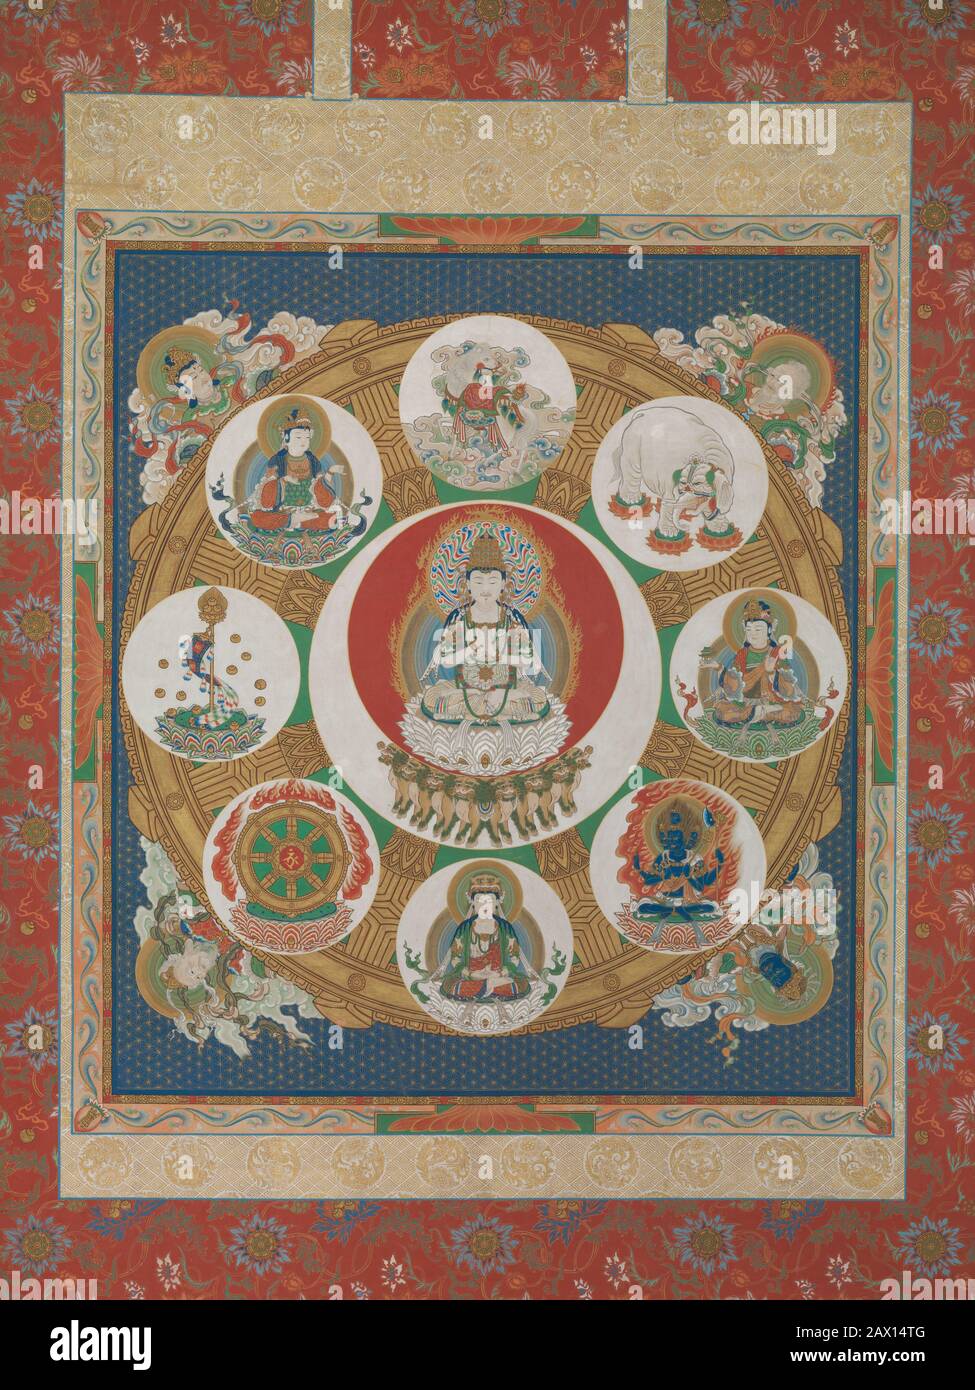 Mandala of the One-Syllable Golden Wheel, 18th century. The Mandala of the One-Syllable Golden Wheel (Japanese: Ichiji Kinrin Mandara) envisions the power of a single Sanskrit syllable, the utterance of which calls forth a personification of the cranial protuberance of the Buddha. It is used in rituals for the prevention of disaster, for the expansion of wealth, and for success in love, as well as for assuring safe delivery of children, career success, and propitious weather. The figural representation of the sound sits at the center of the mandala on a lotus pedestal borne by eight lions. It Stock Photo